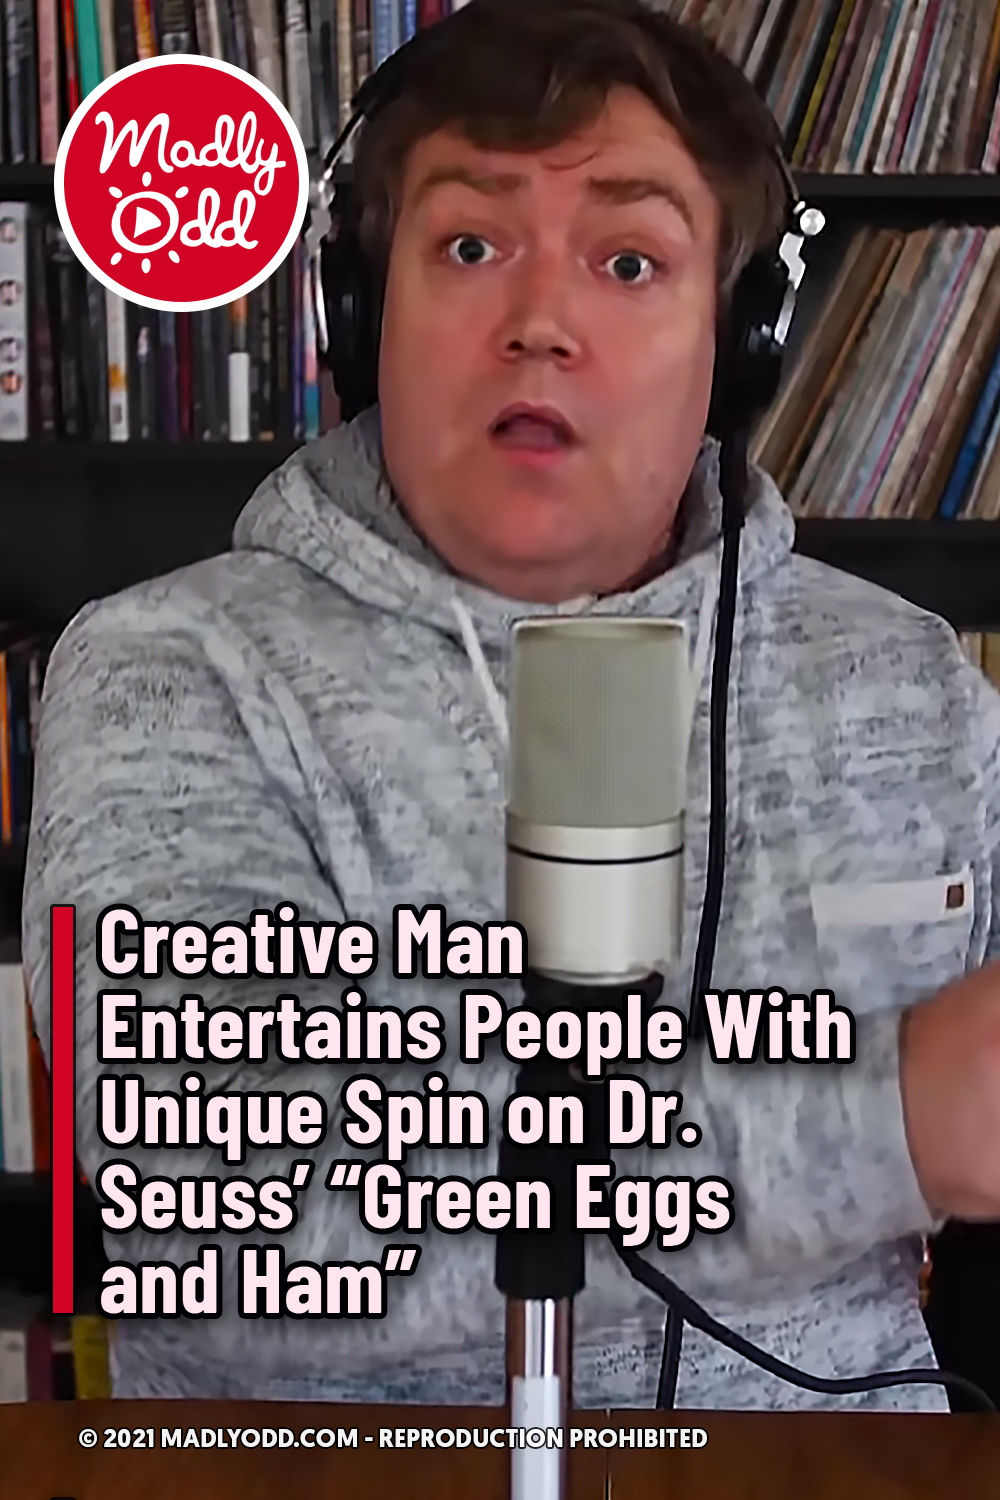 Creative Man Entertains People With Unique Spin on Dr. Seuss’ “Green Eggs and Ham”